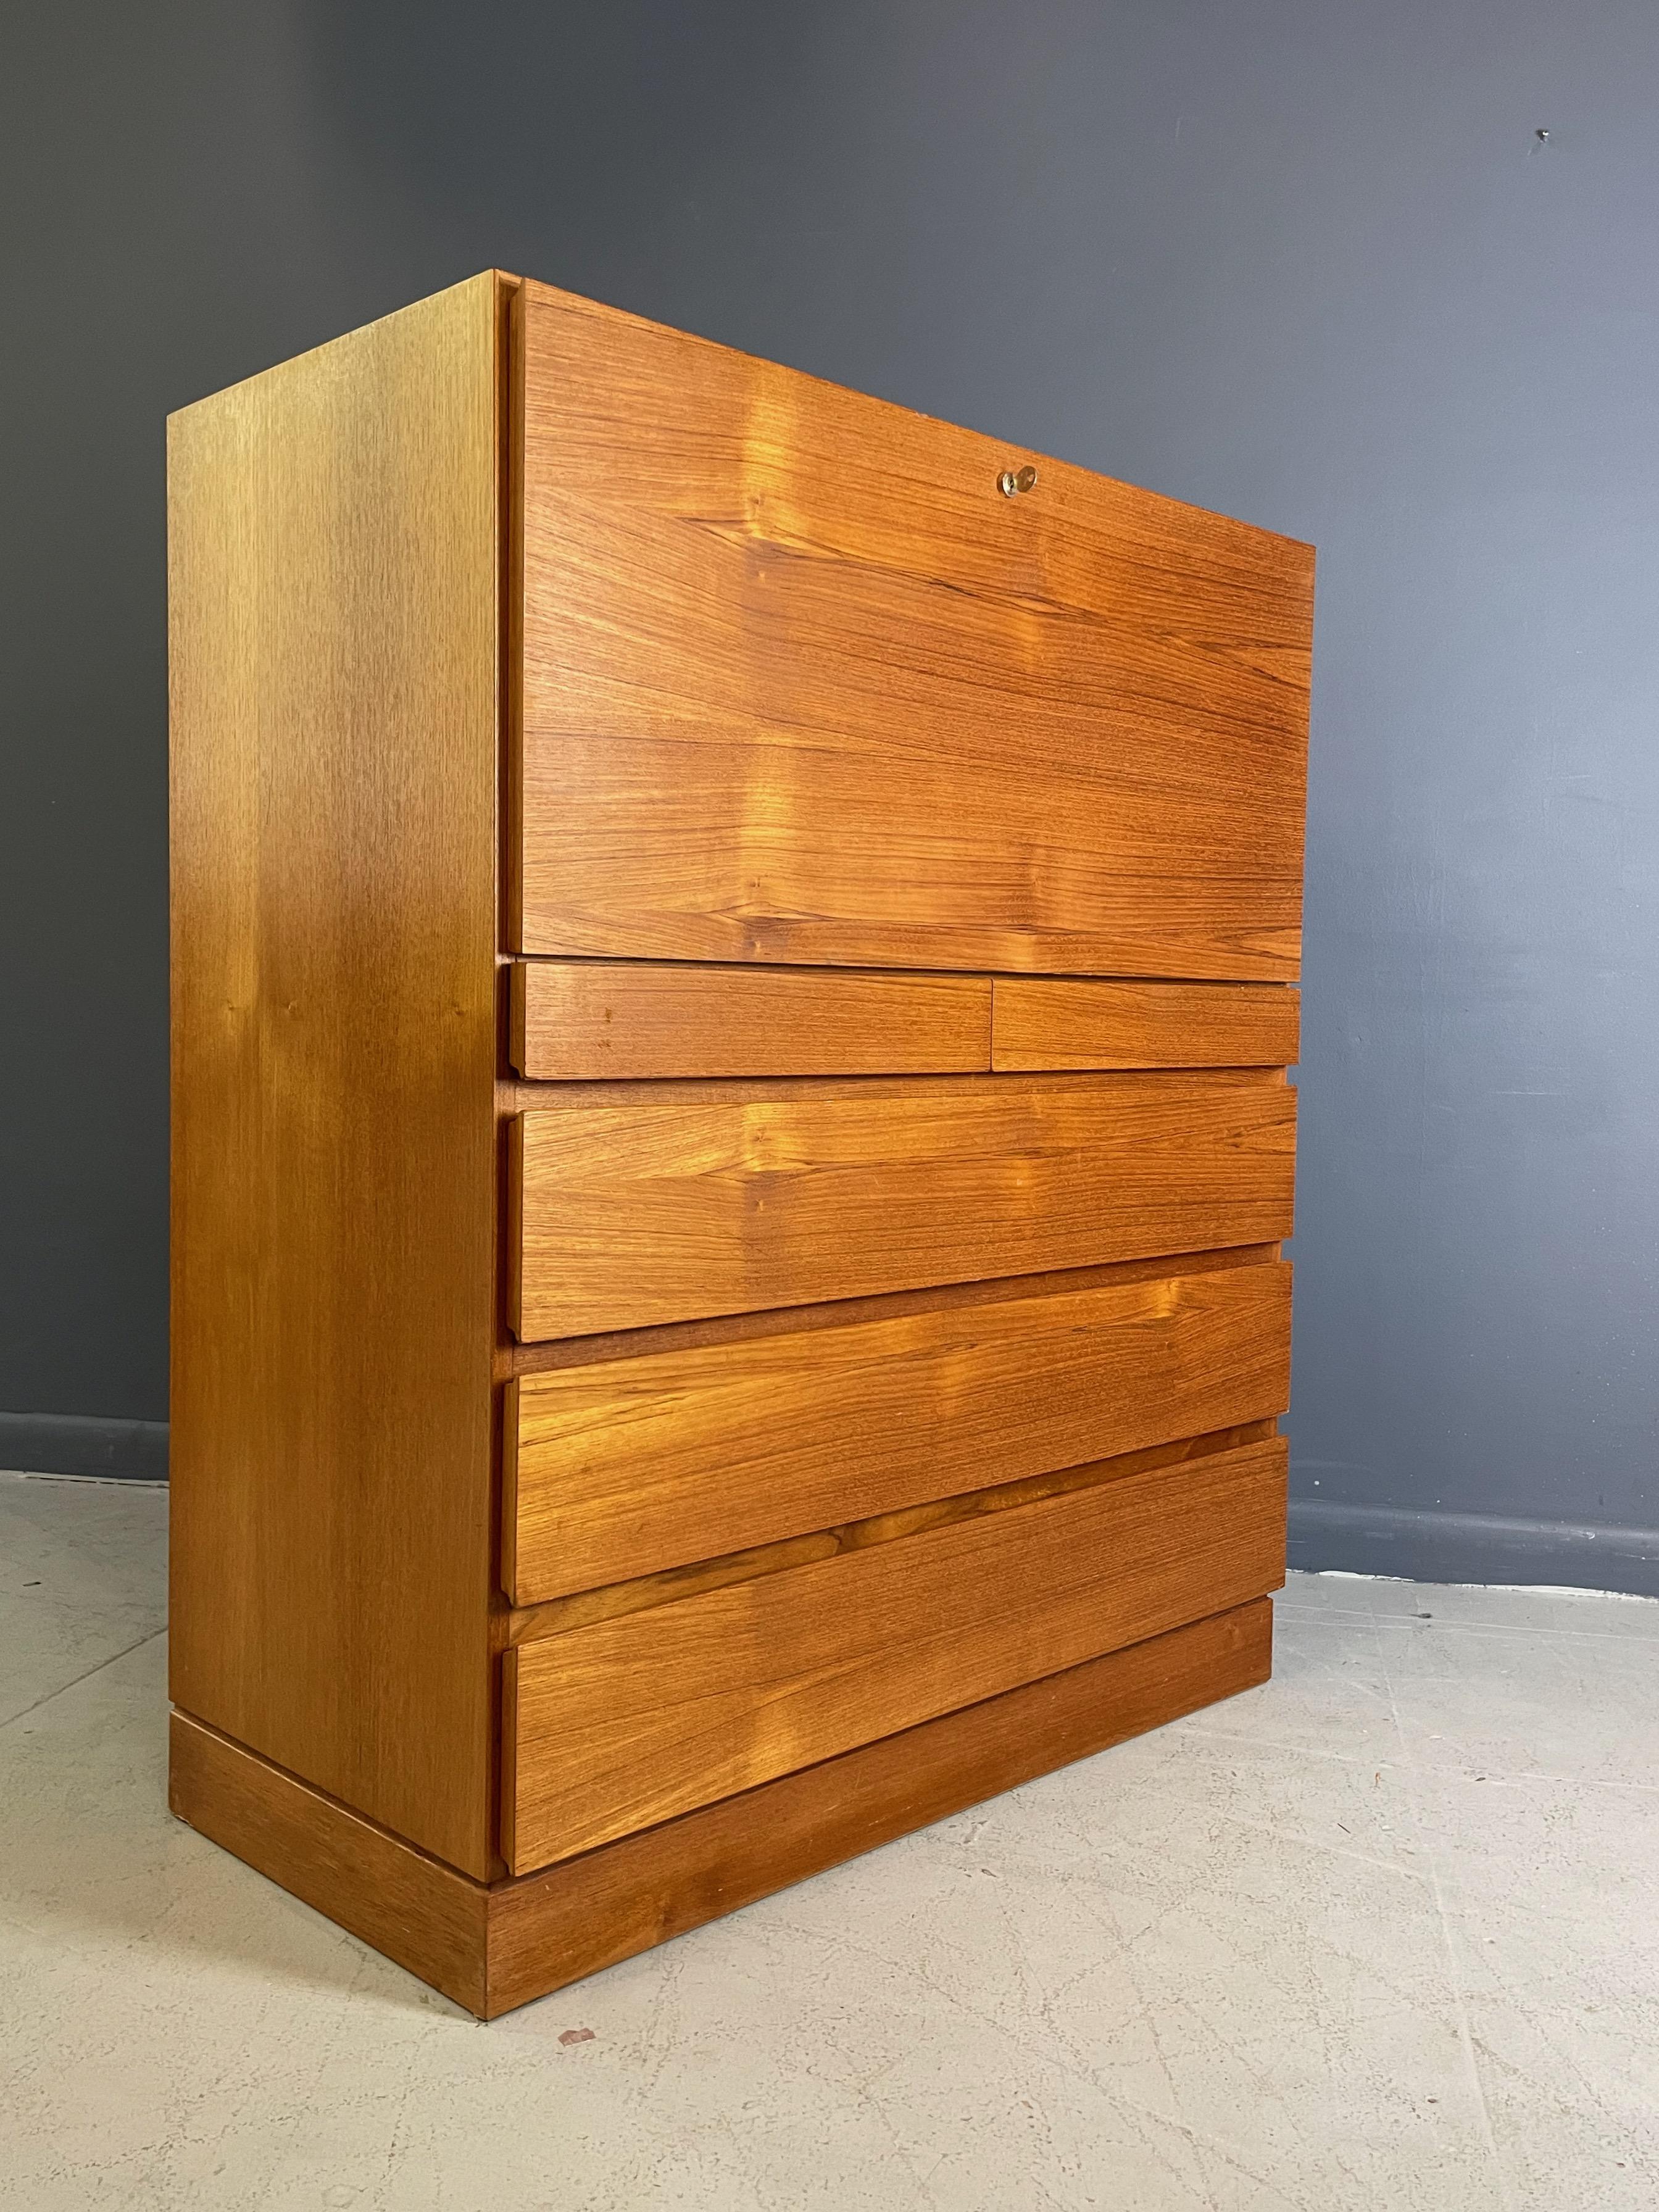 Classic Danish modern cabinetry on this piece, a desk in teak with door that pulls down to reveal a generous work area and cubbies that can store all your needs. Below the desk are two small drawers and three large drawer providing plenty of